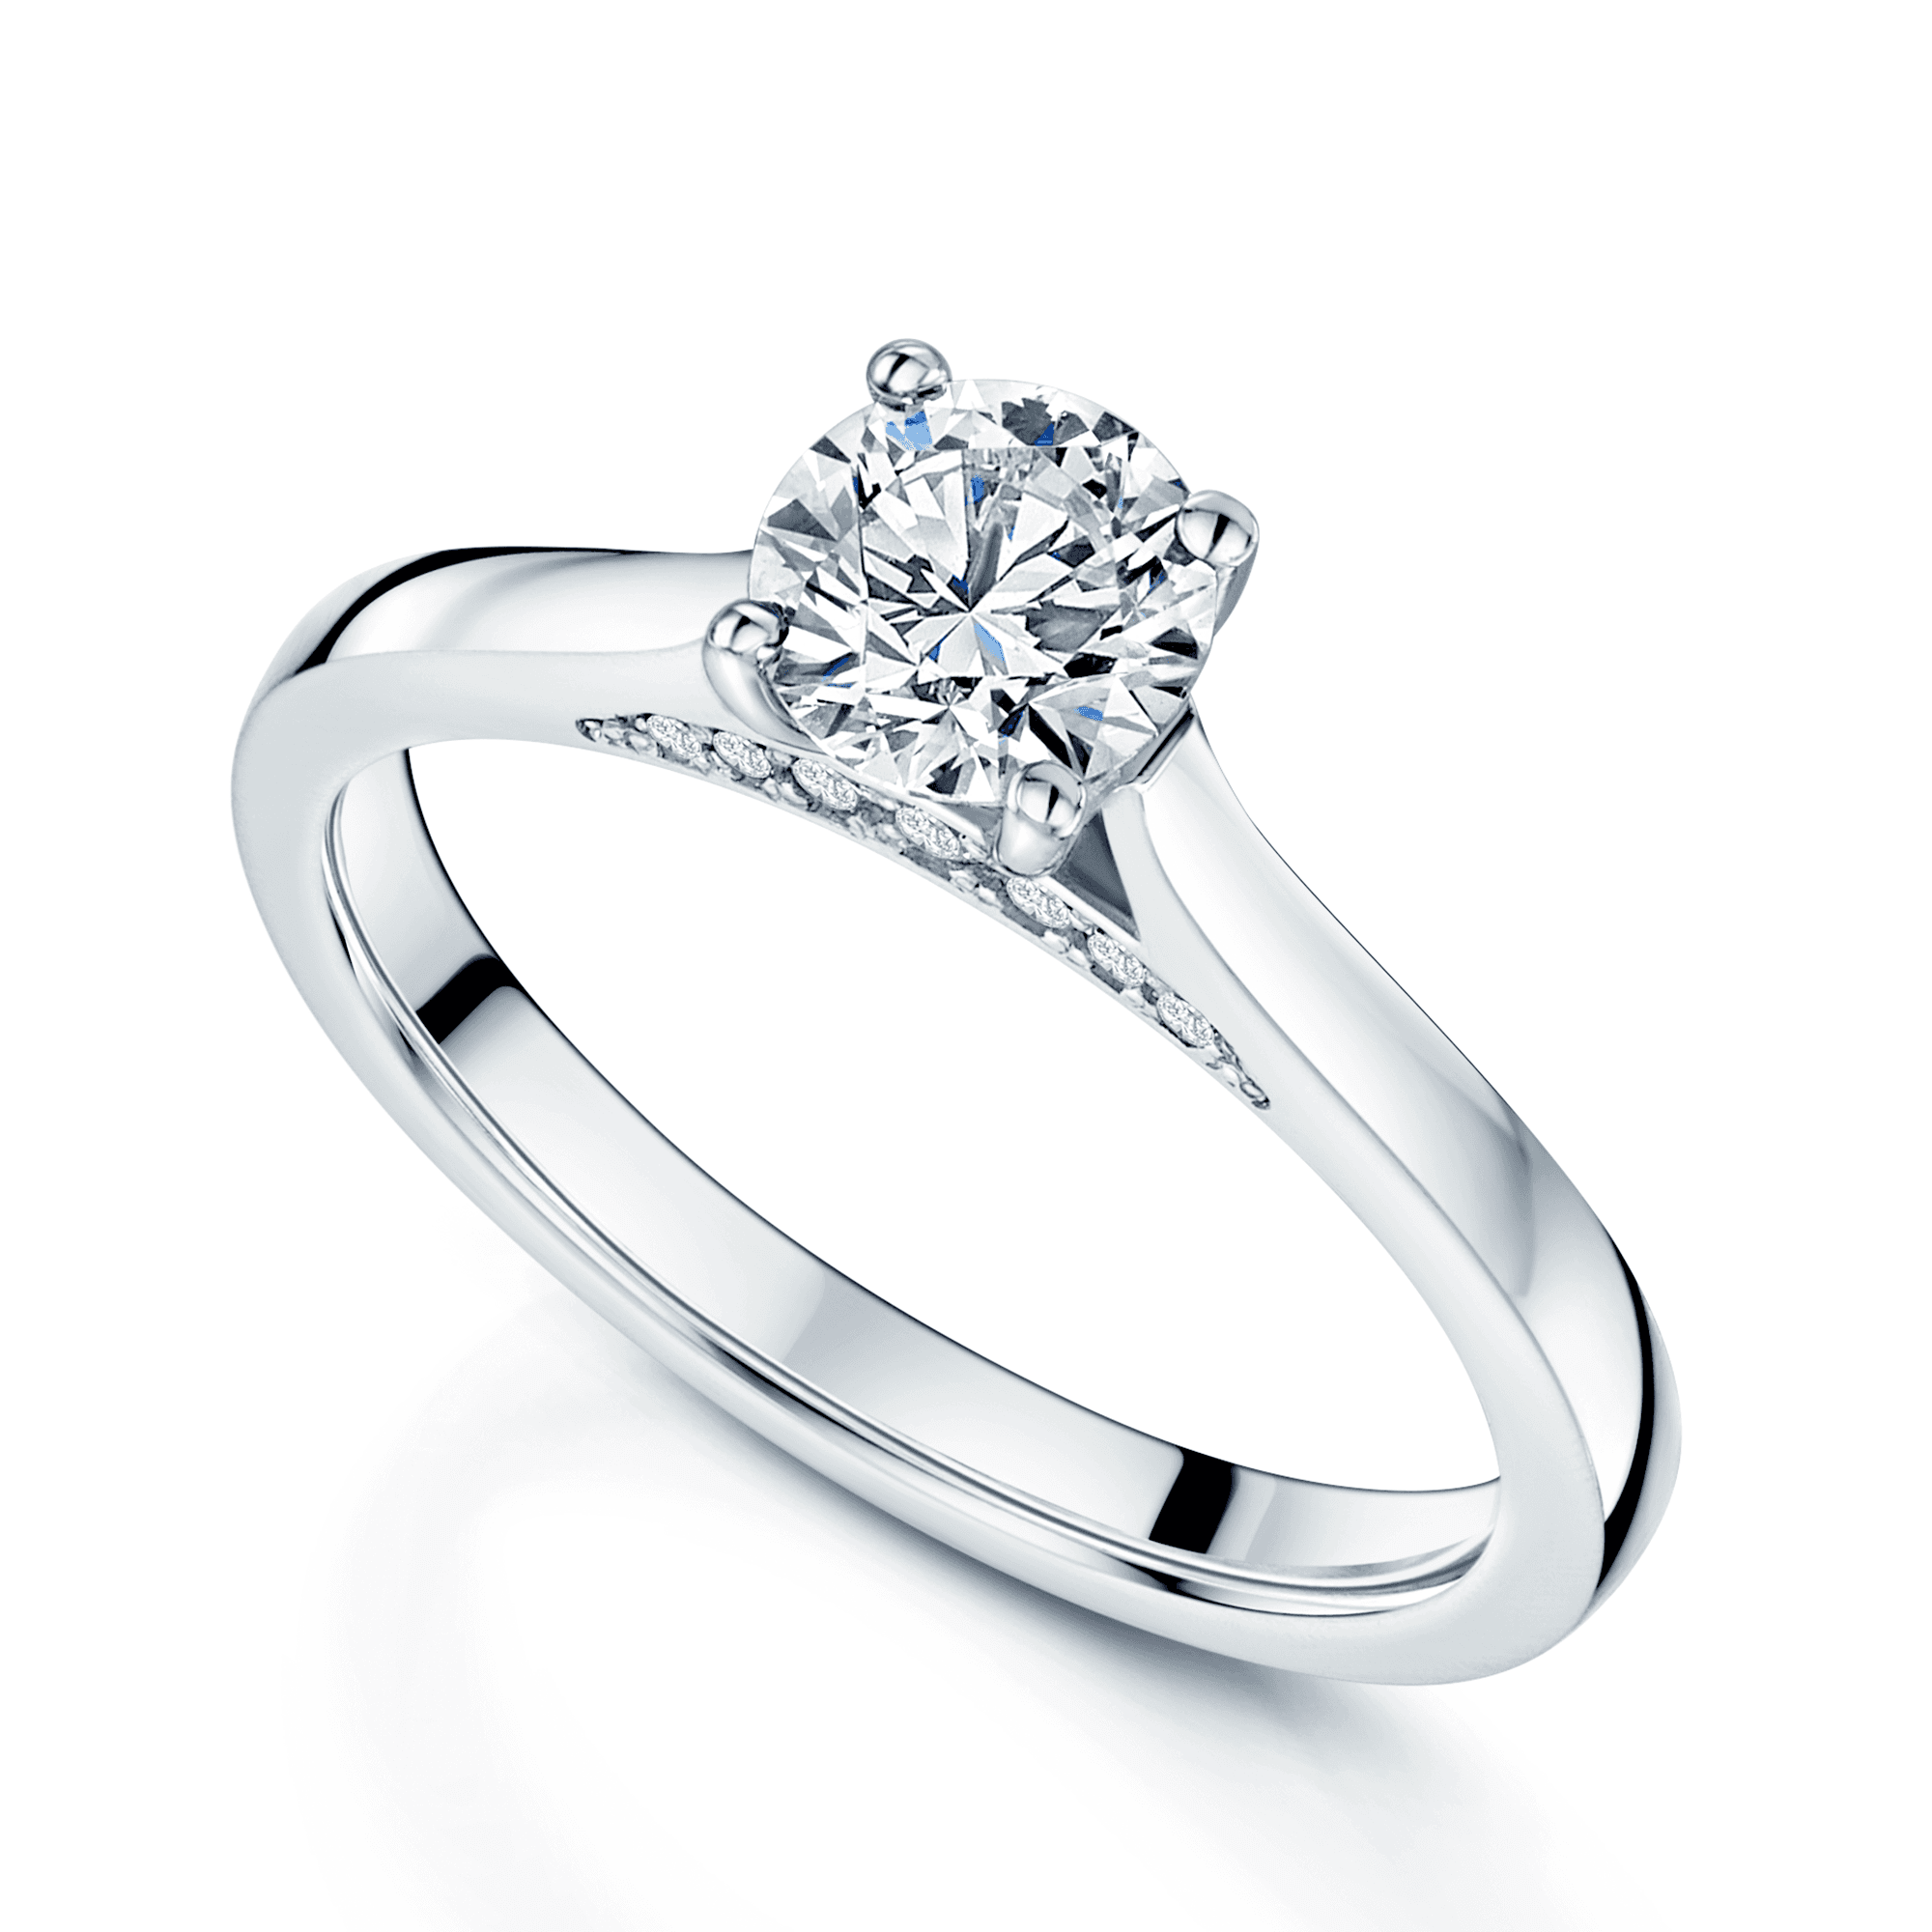 Platinum GIA Certificated 0.75 Carat Round Brilliant Cut Diamond Solitaire Ring With A Diamond Under Bezel